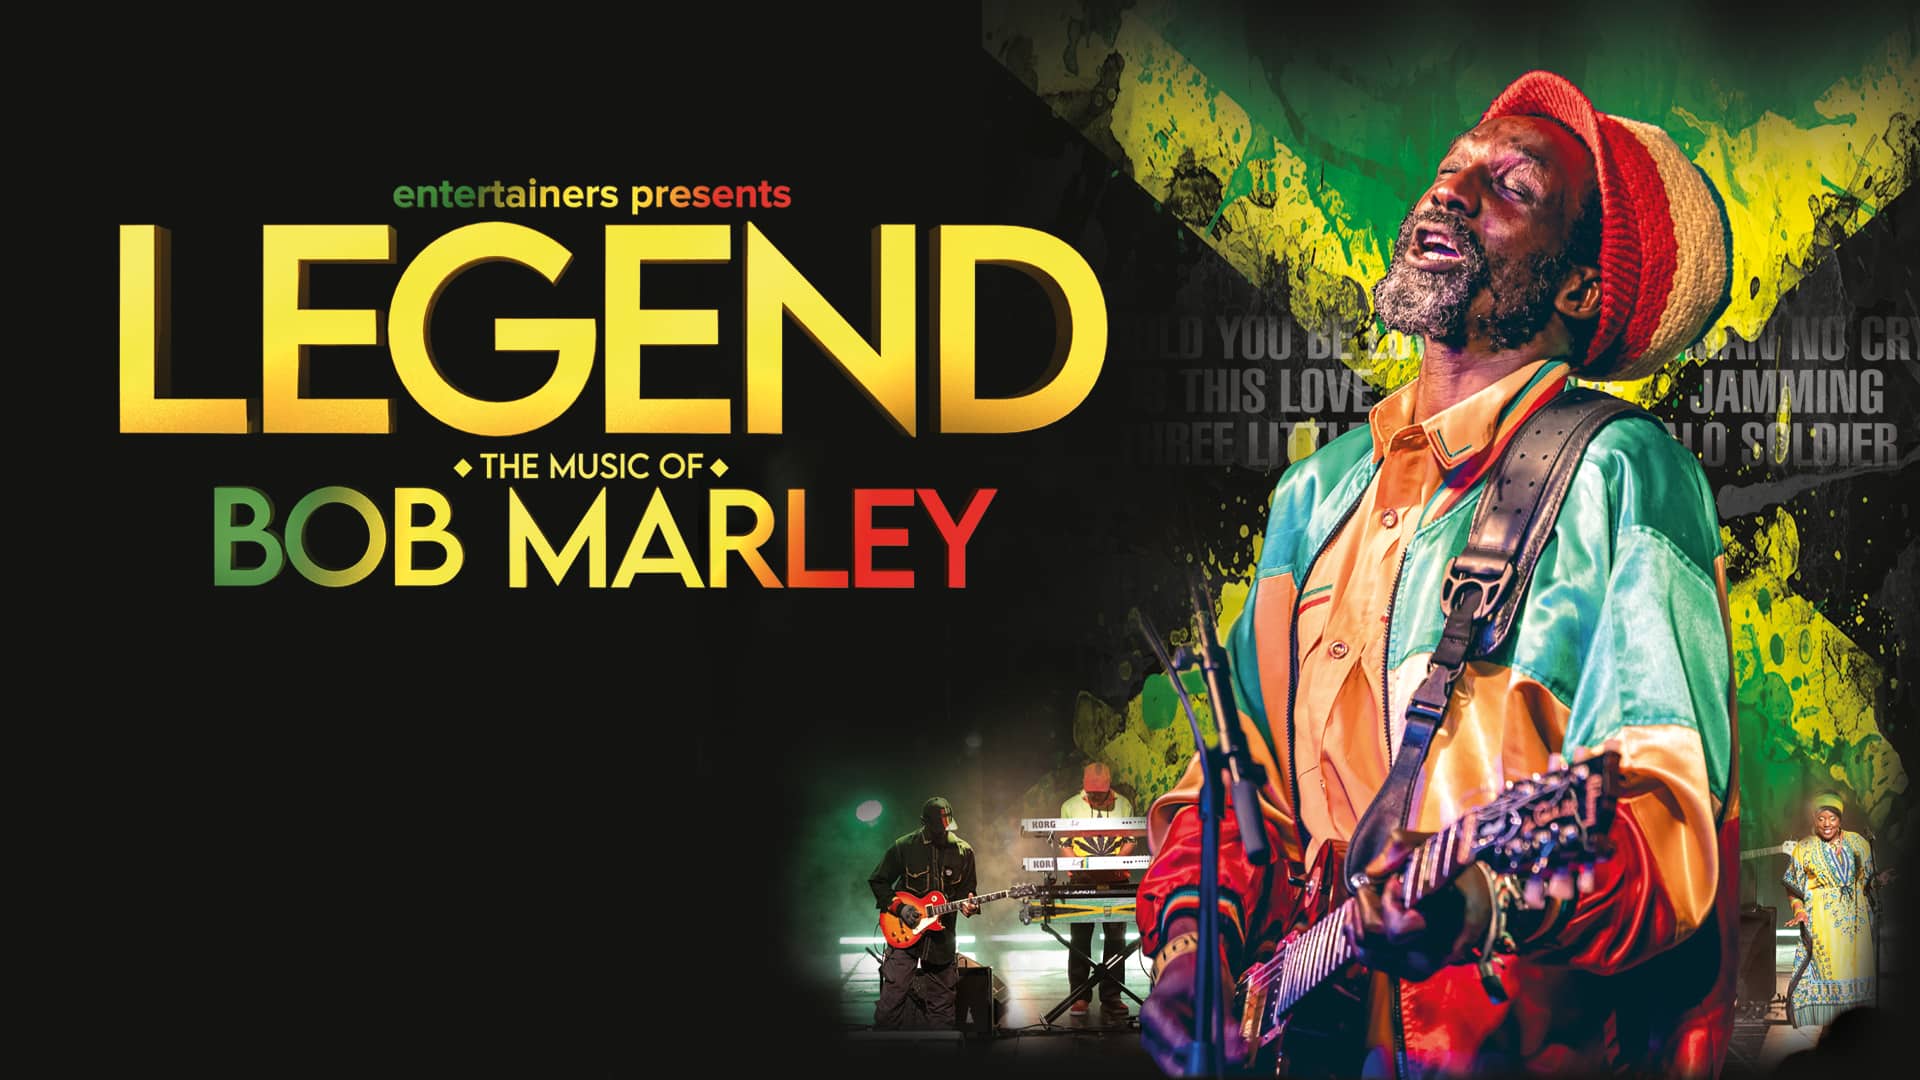 Legend the music of Bob Marley - Shows a man who looks like Bob Marley in his typical colourful style of dress with his famous multi-coloured hat playing the guitar. There's a further band in the background.